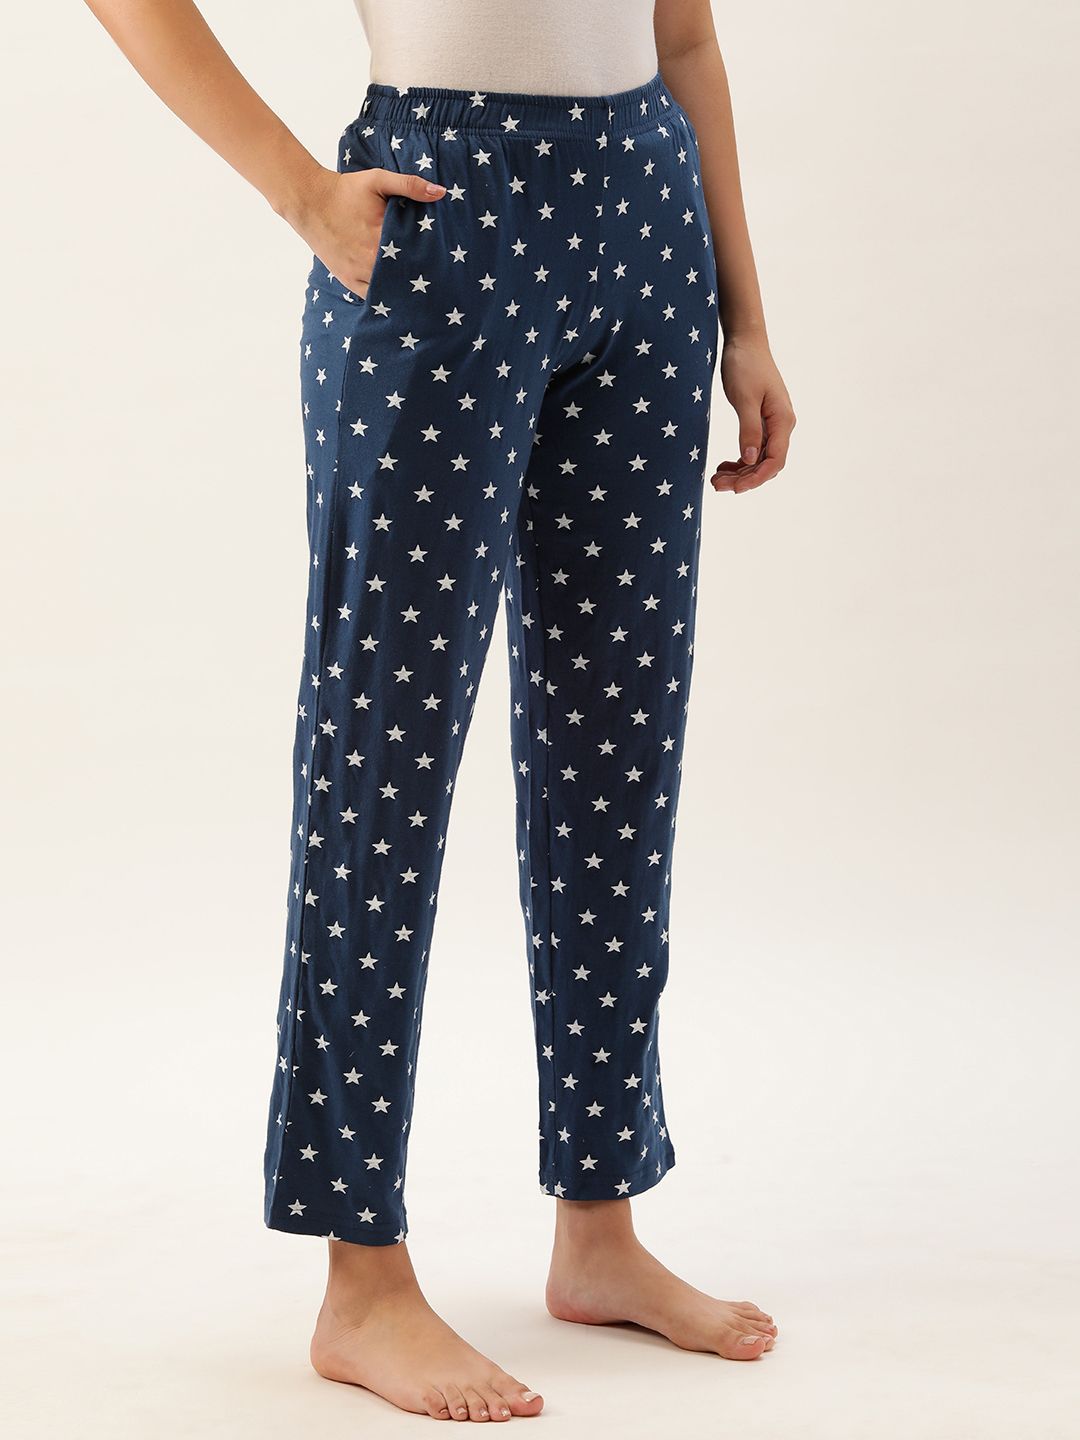 Clt.s Women Navy Blue & White Pure Cotton Printed Lounge Pants Price in India